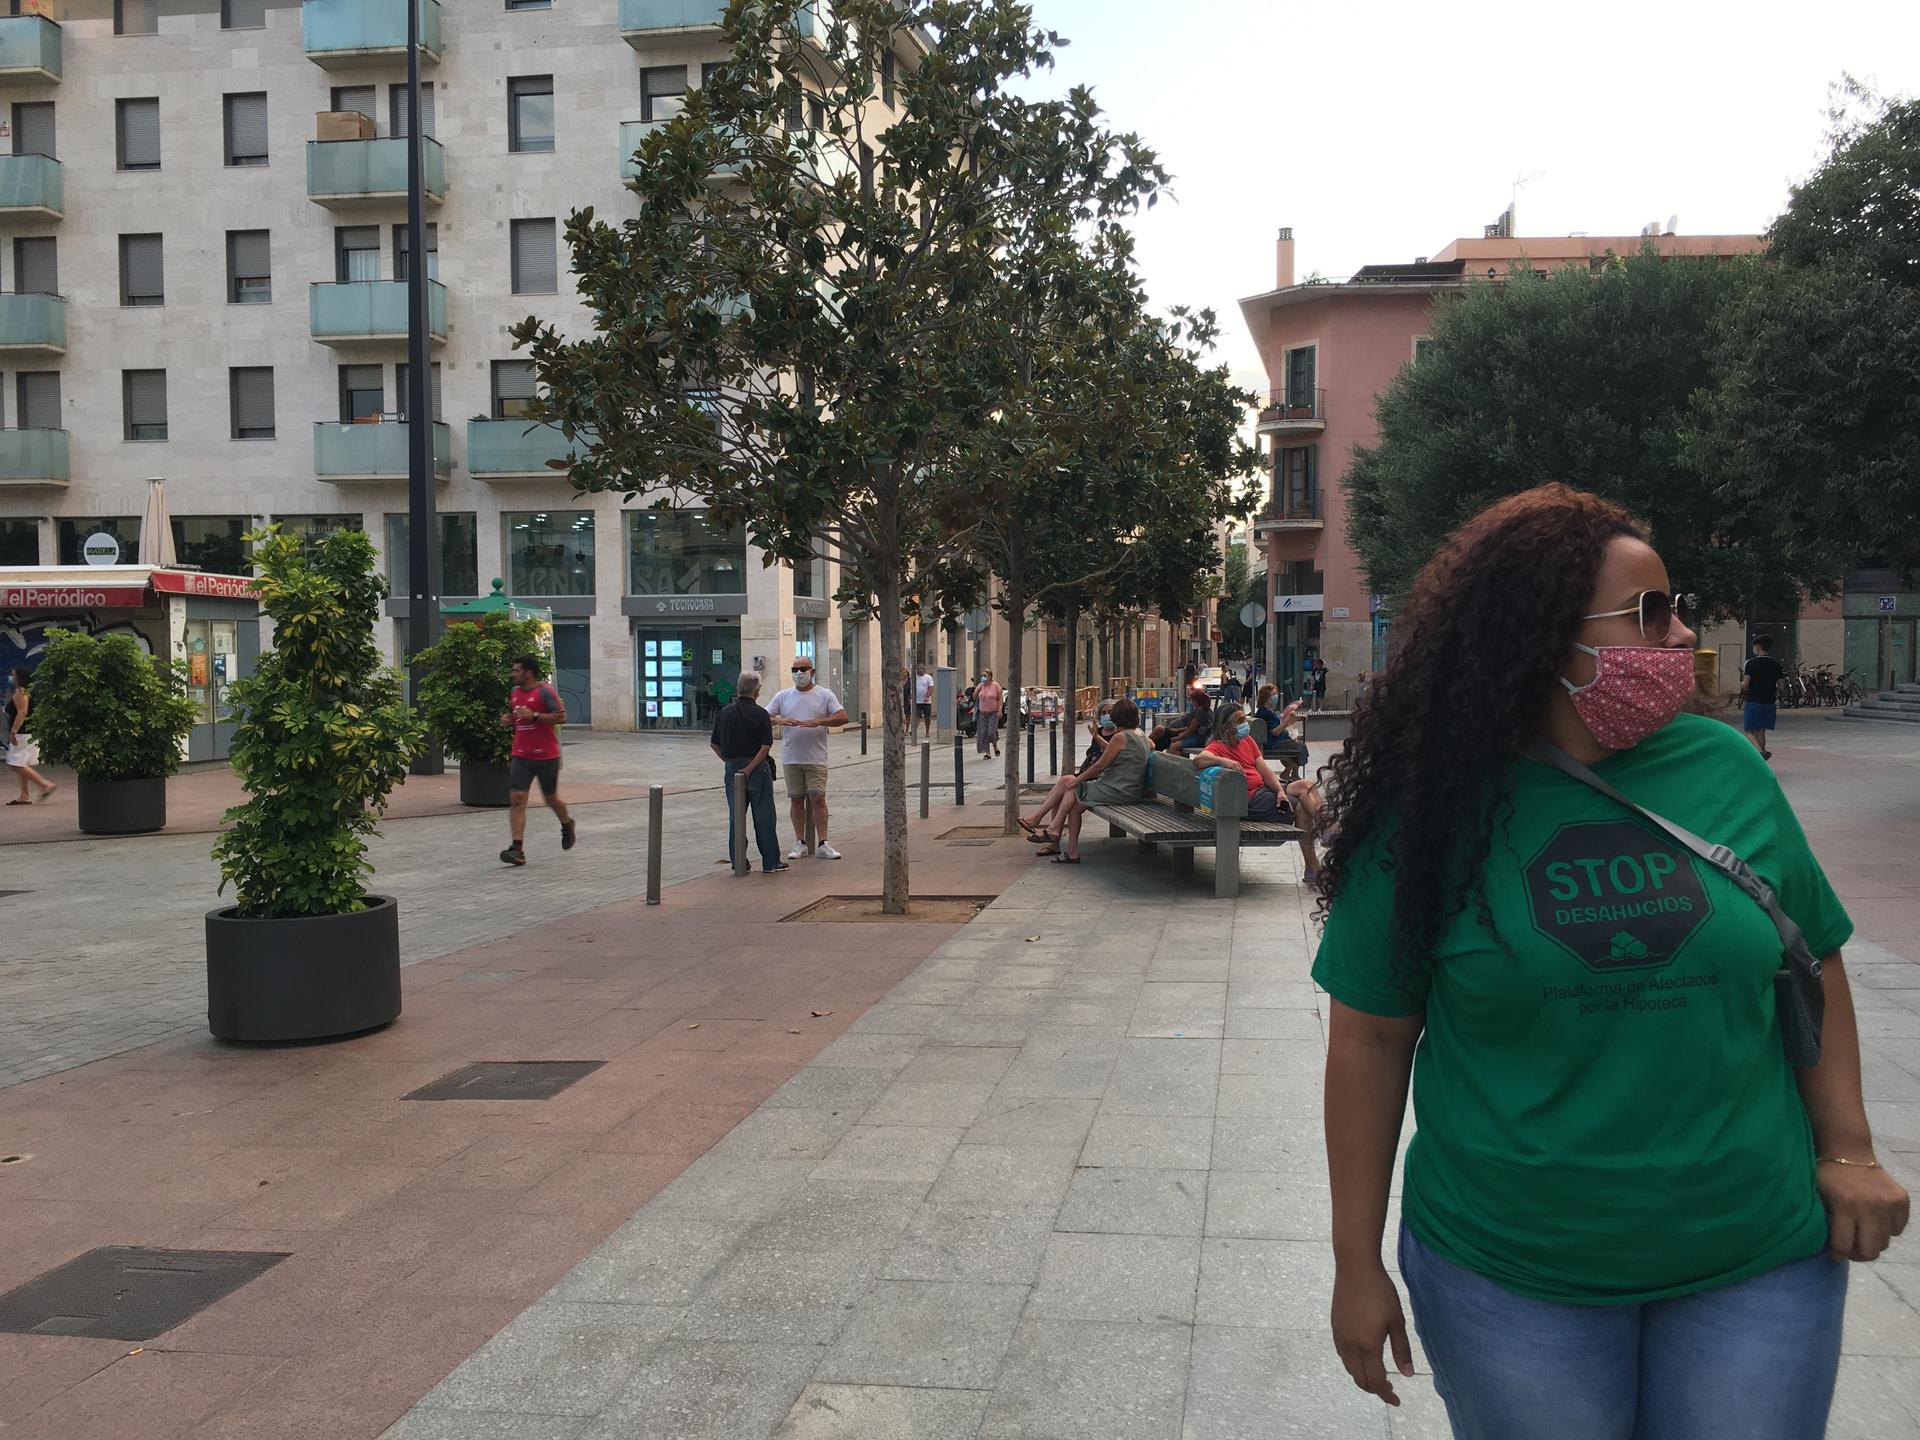 A woman with long brown, curly hair wears a green shirt and jeans as she walks down an urban street.